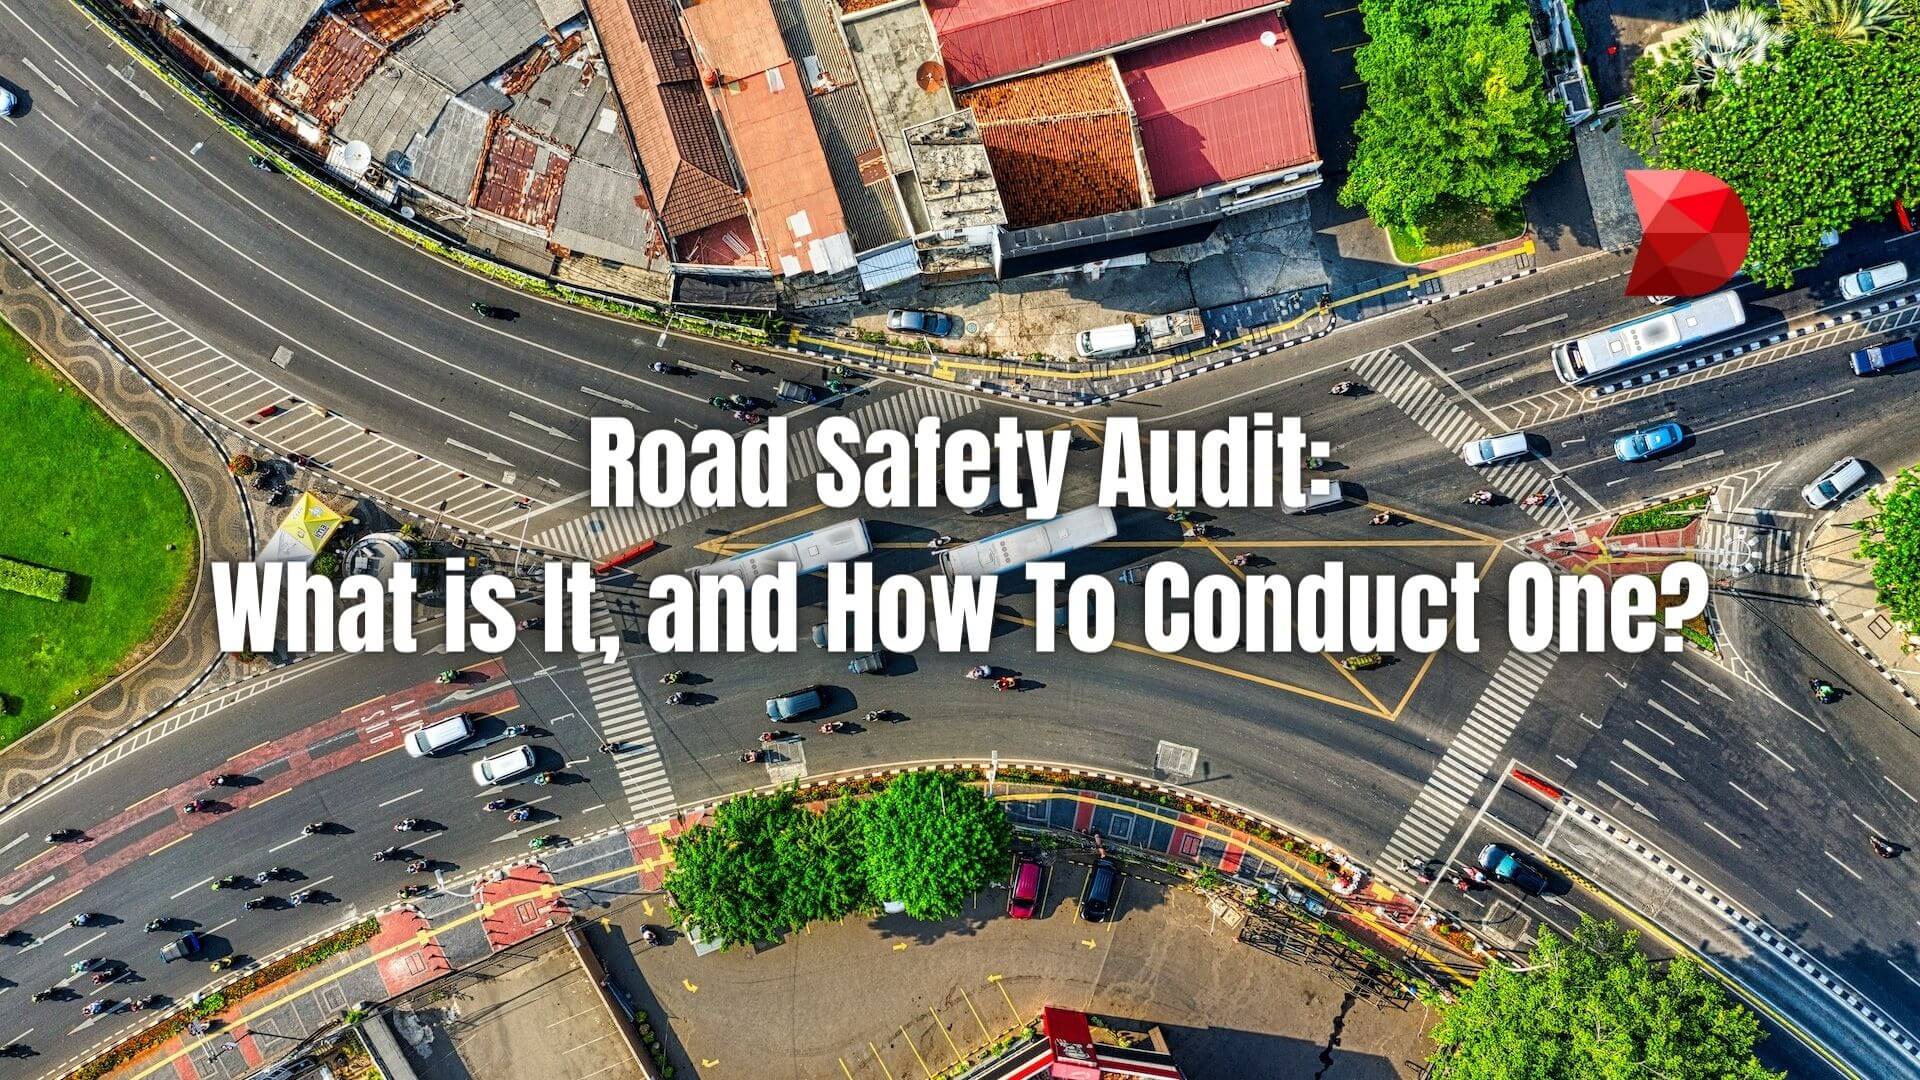 A road safety audit is a full evaluation of the safety performance of a road system. Here's what and how to get started with your checklist.